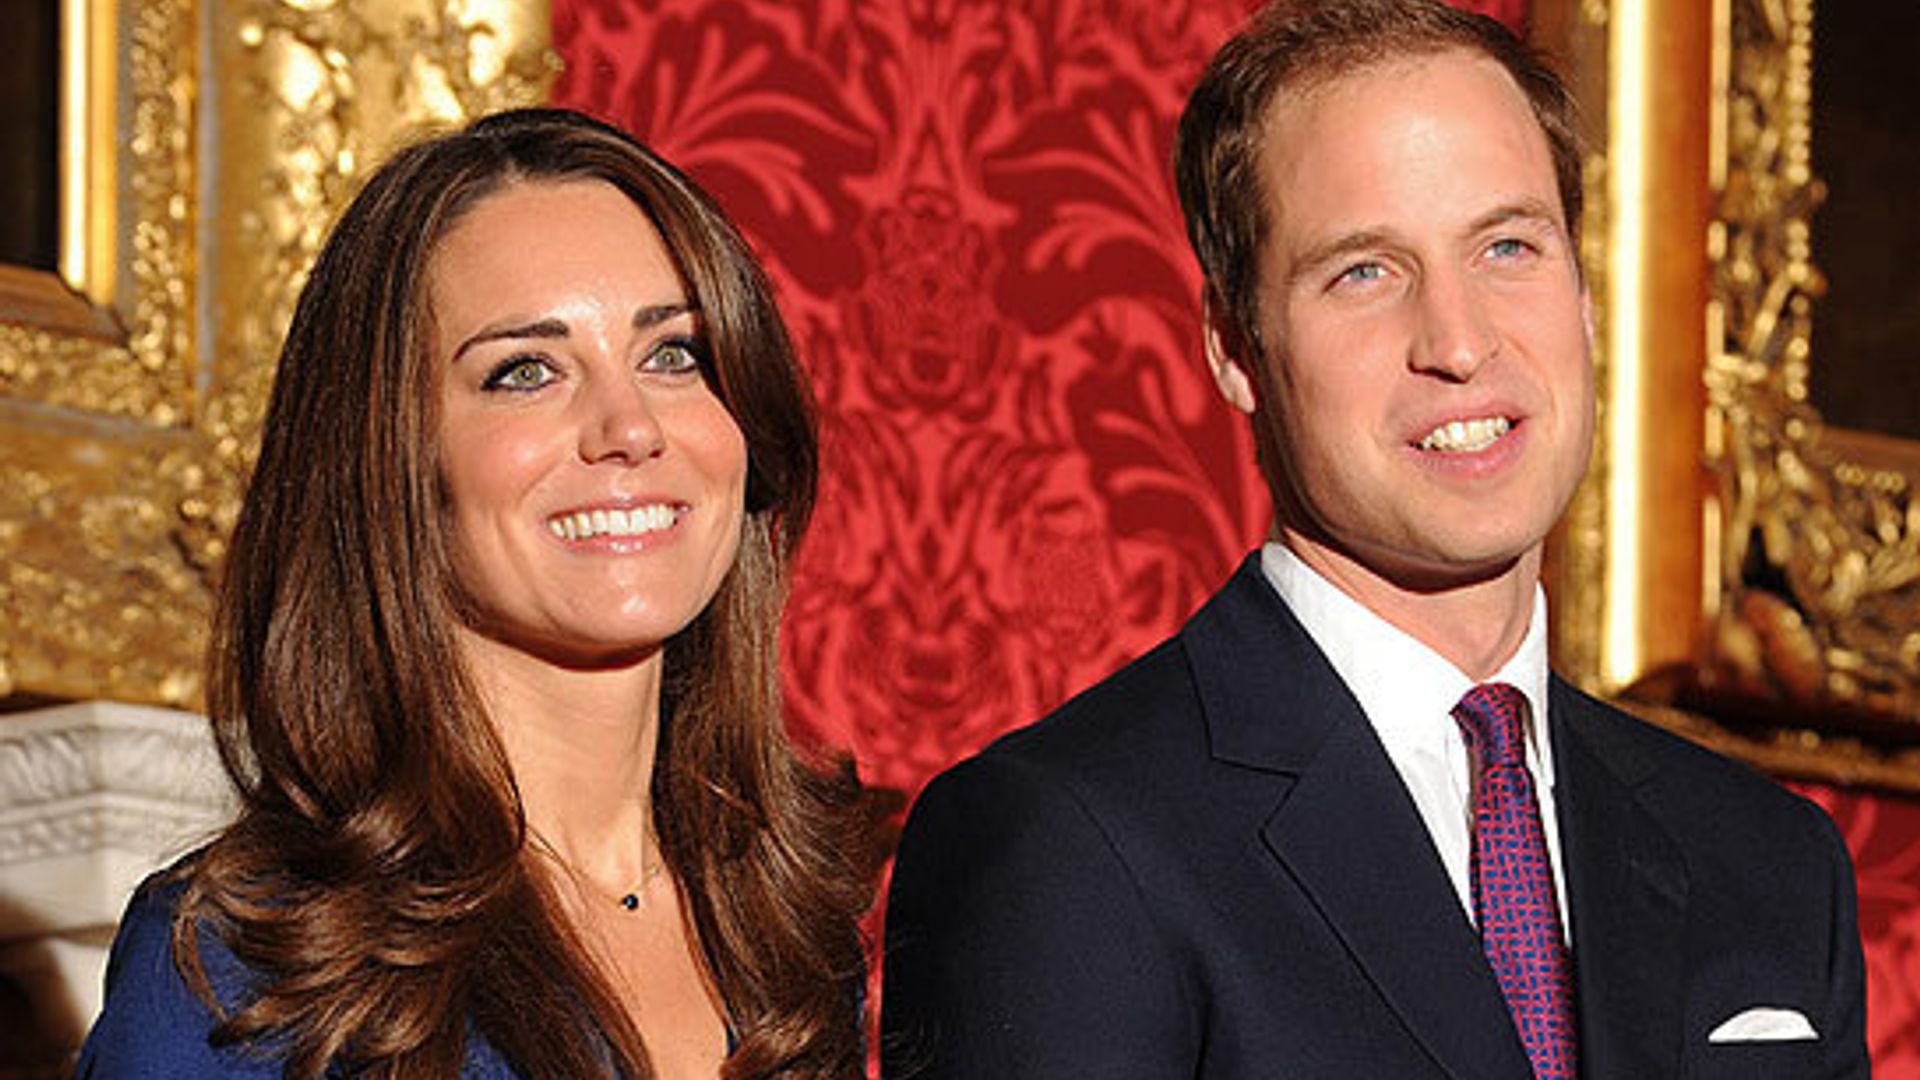 Royal treatment: 6 luxury safaris fit for Prince William and Duchess Kate